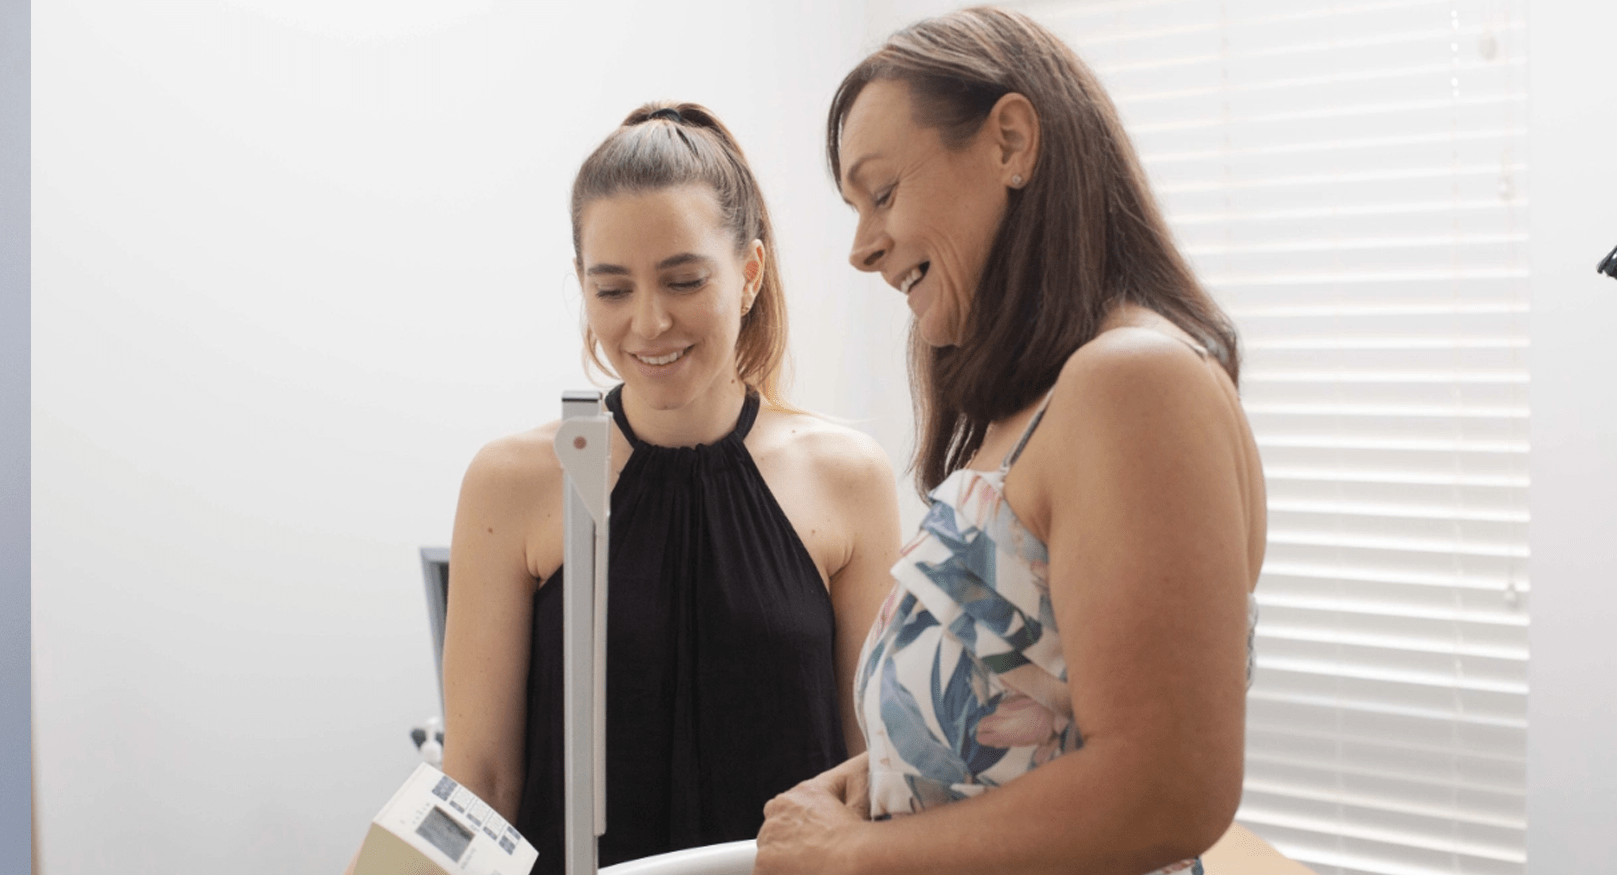 Weight loss surgery – What are the risks?